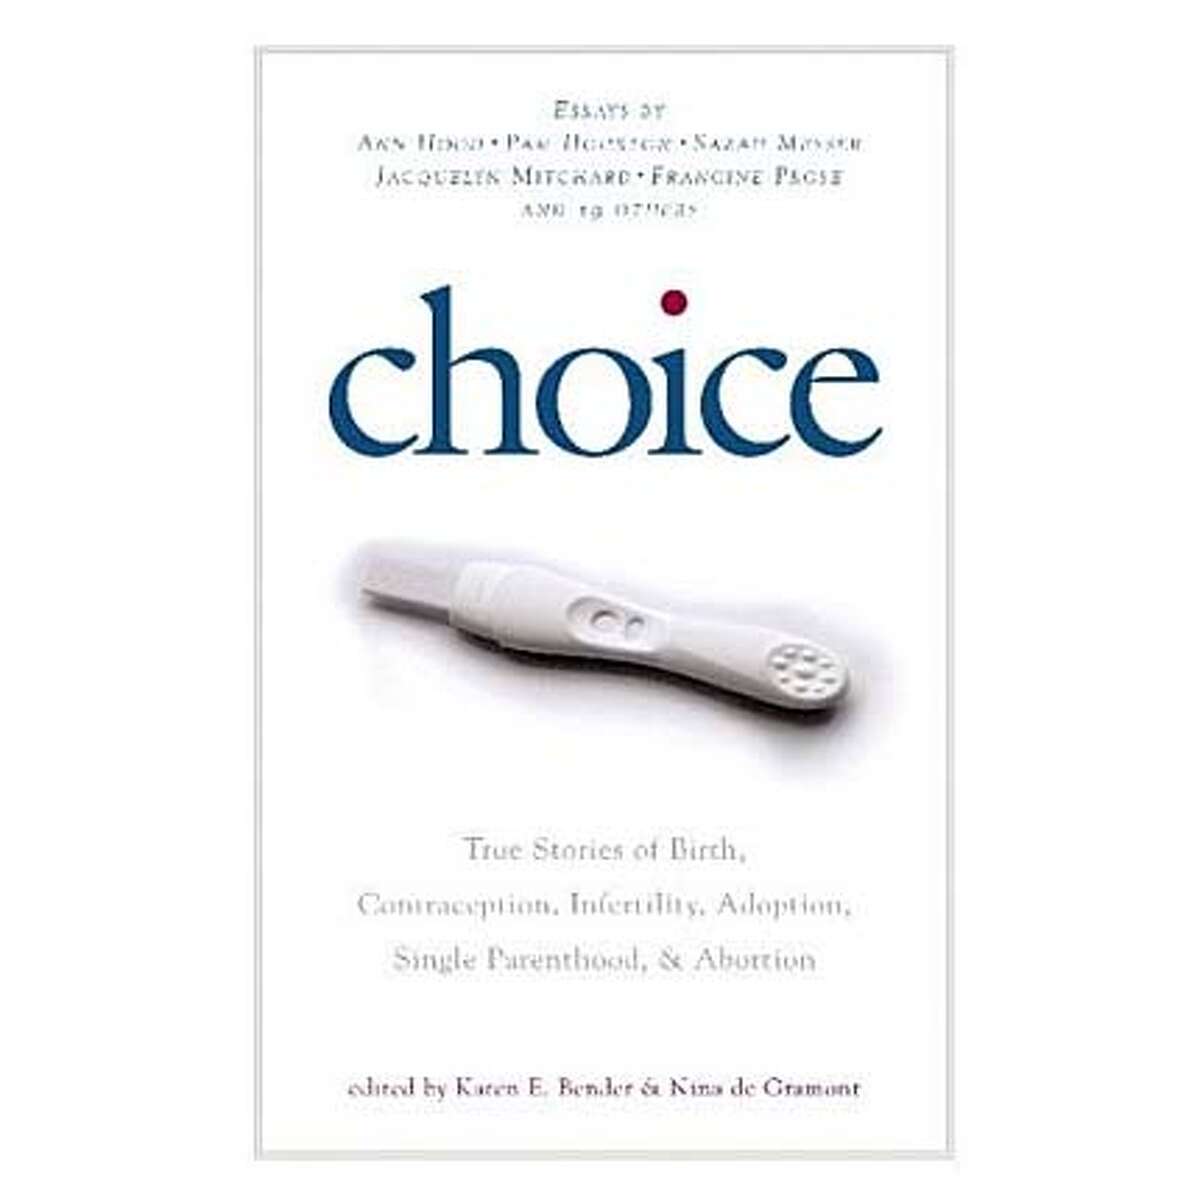 "Choice: True Stories of Birth, Contraception, Infertility, Adoption, Single Parenthood and Abortion," edited by Karen E. Bender and Nina de Gramont